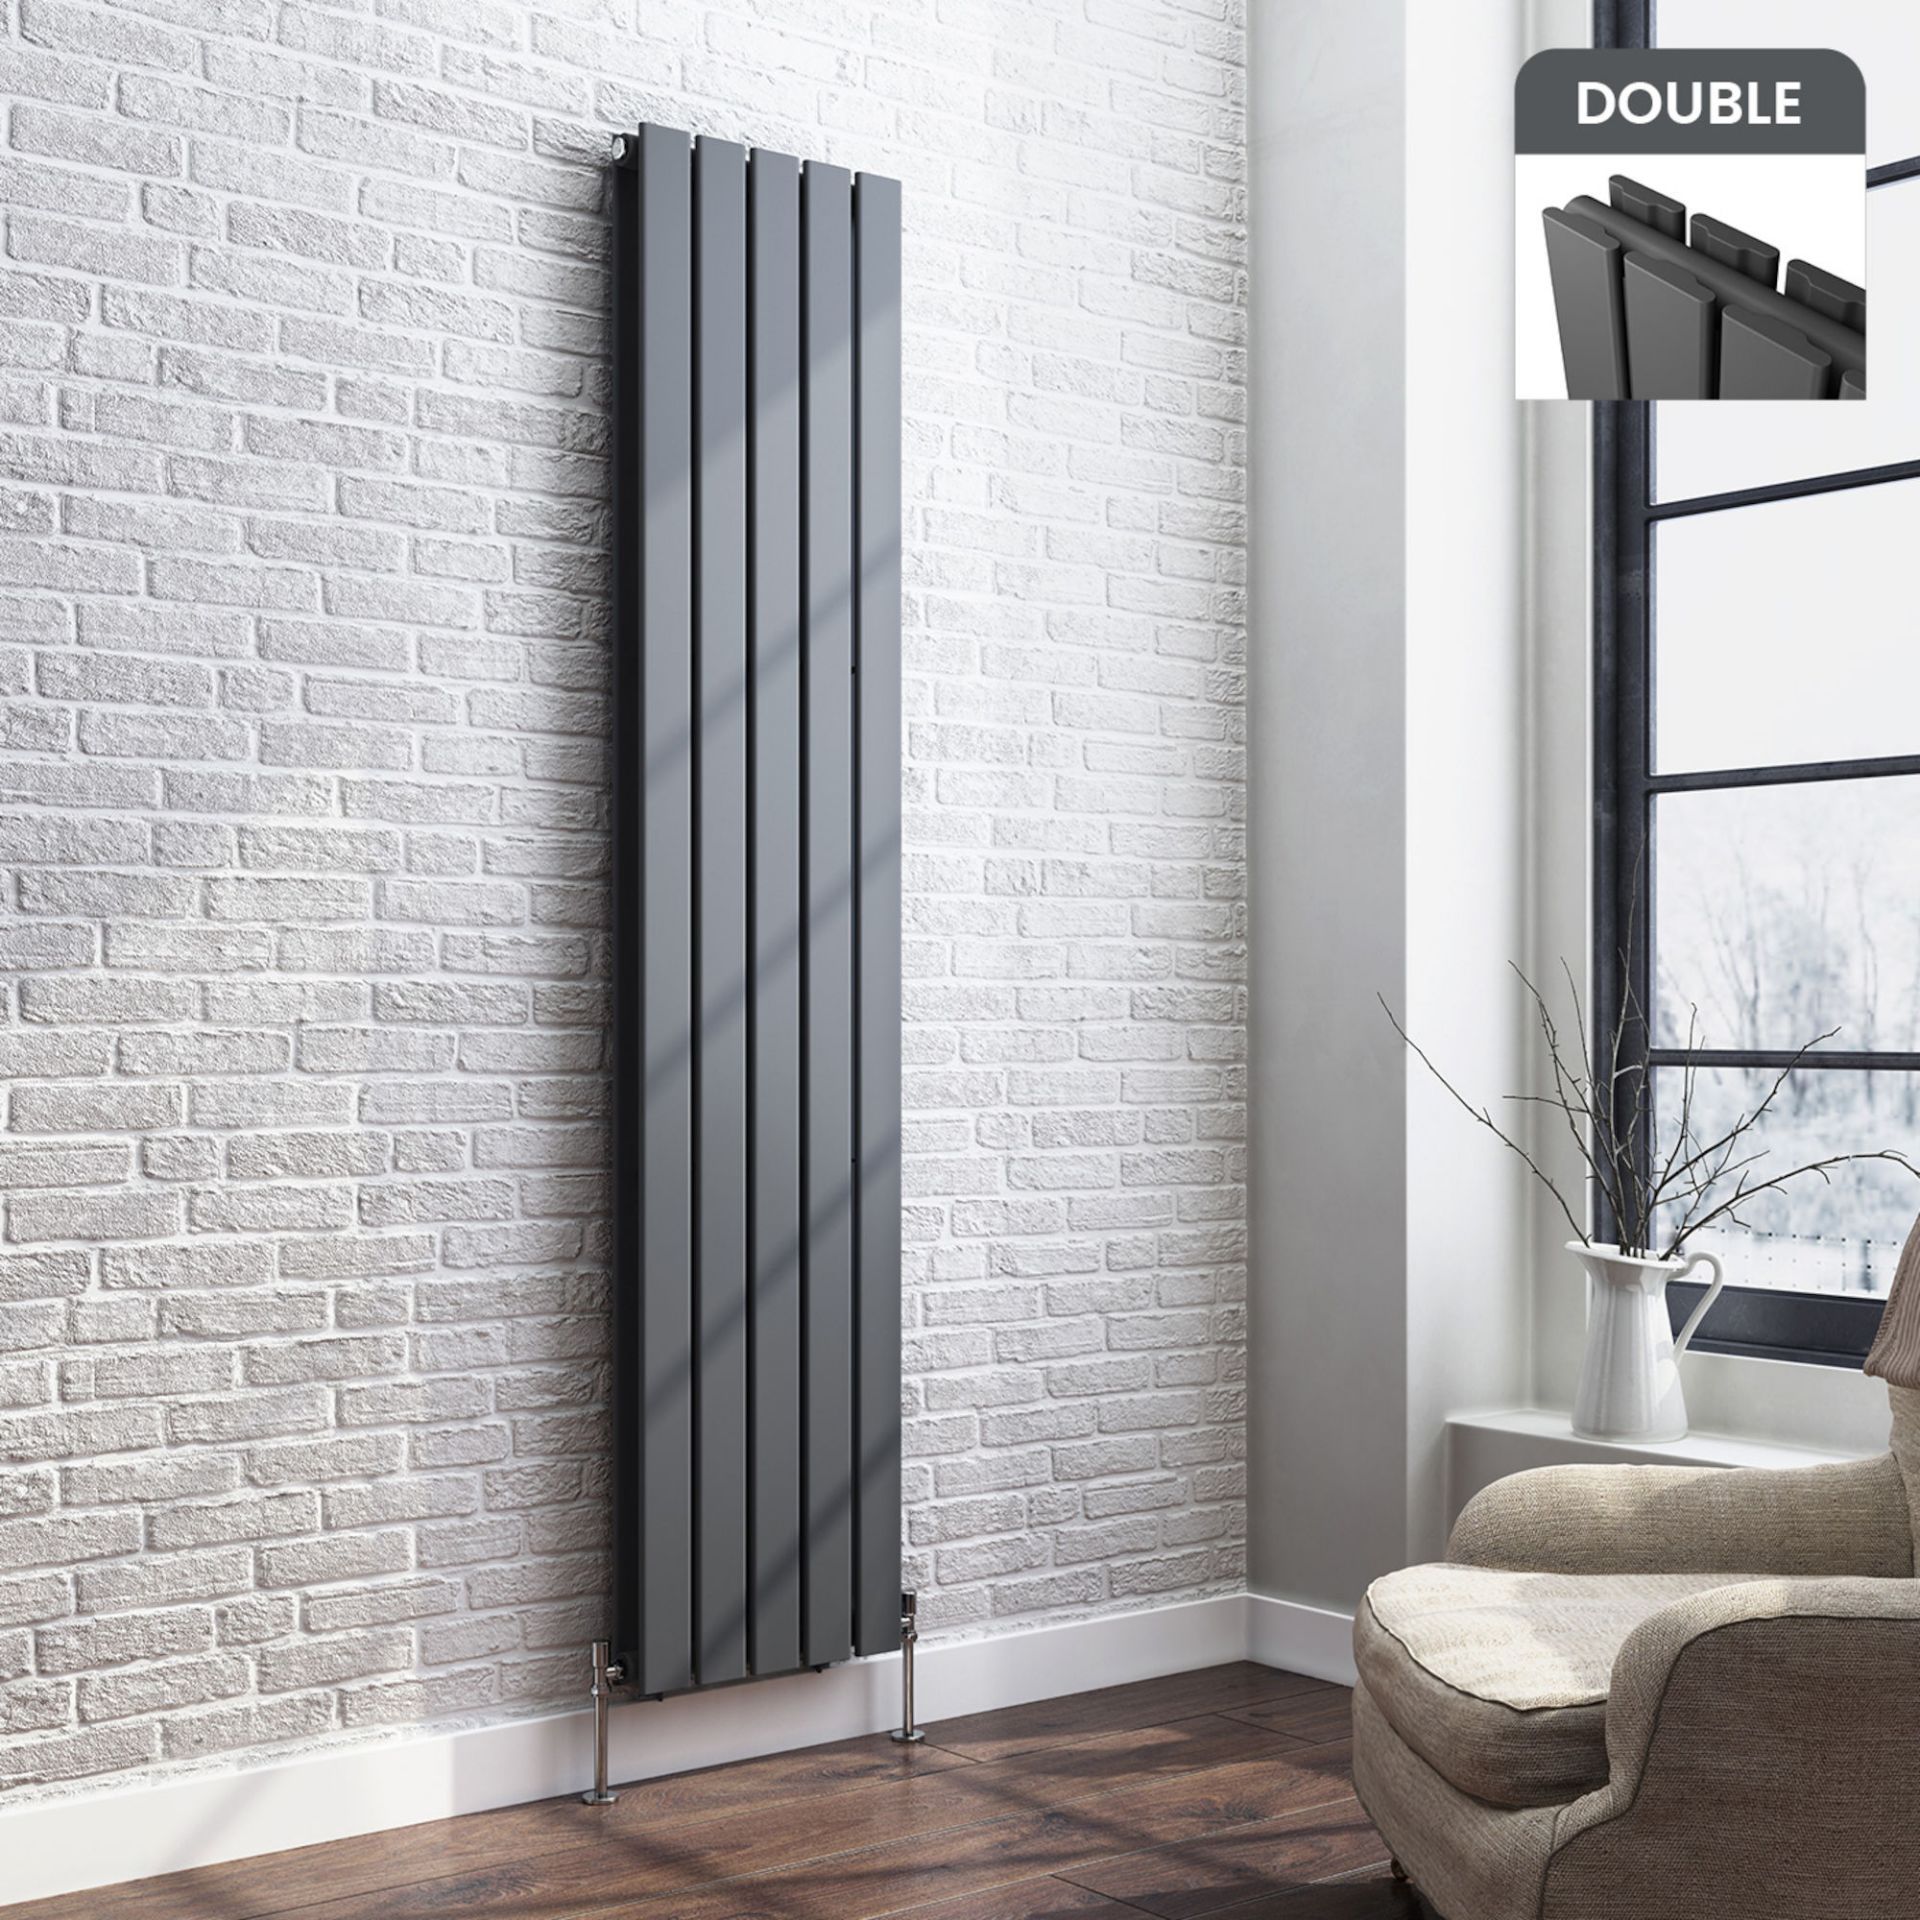 1600x360mm Anthracite Double Flat Panel Vertical Radiator. RRP £444.99. Made with low carbon steel